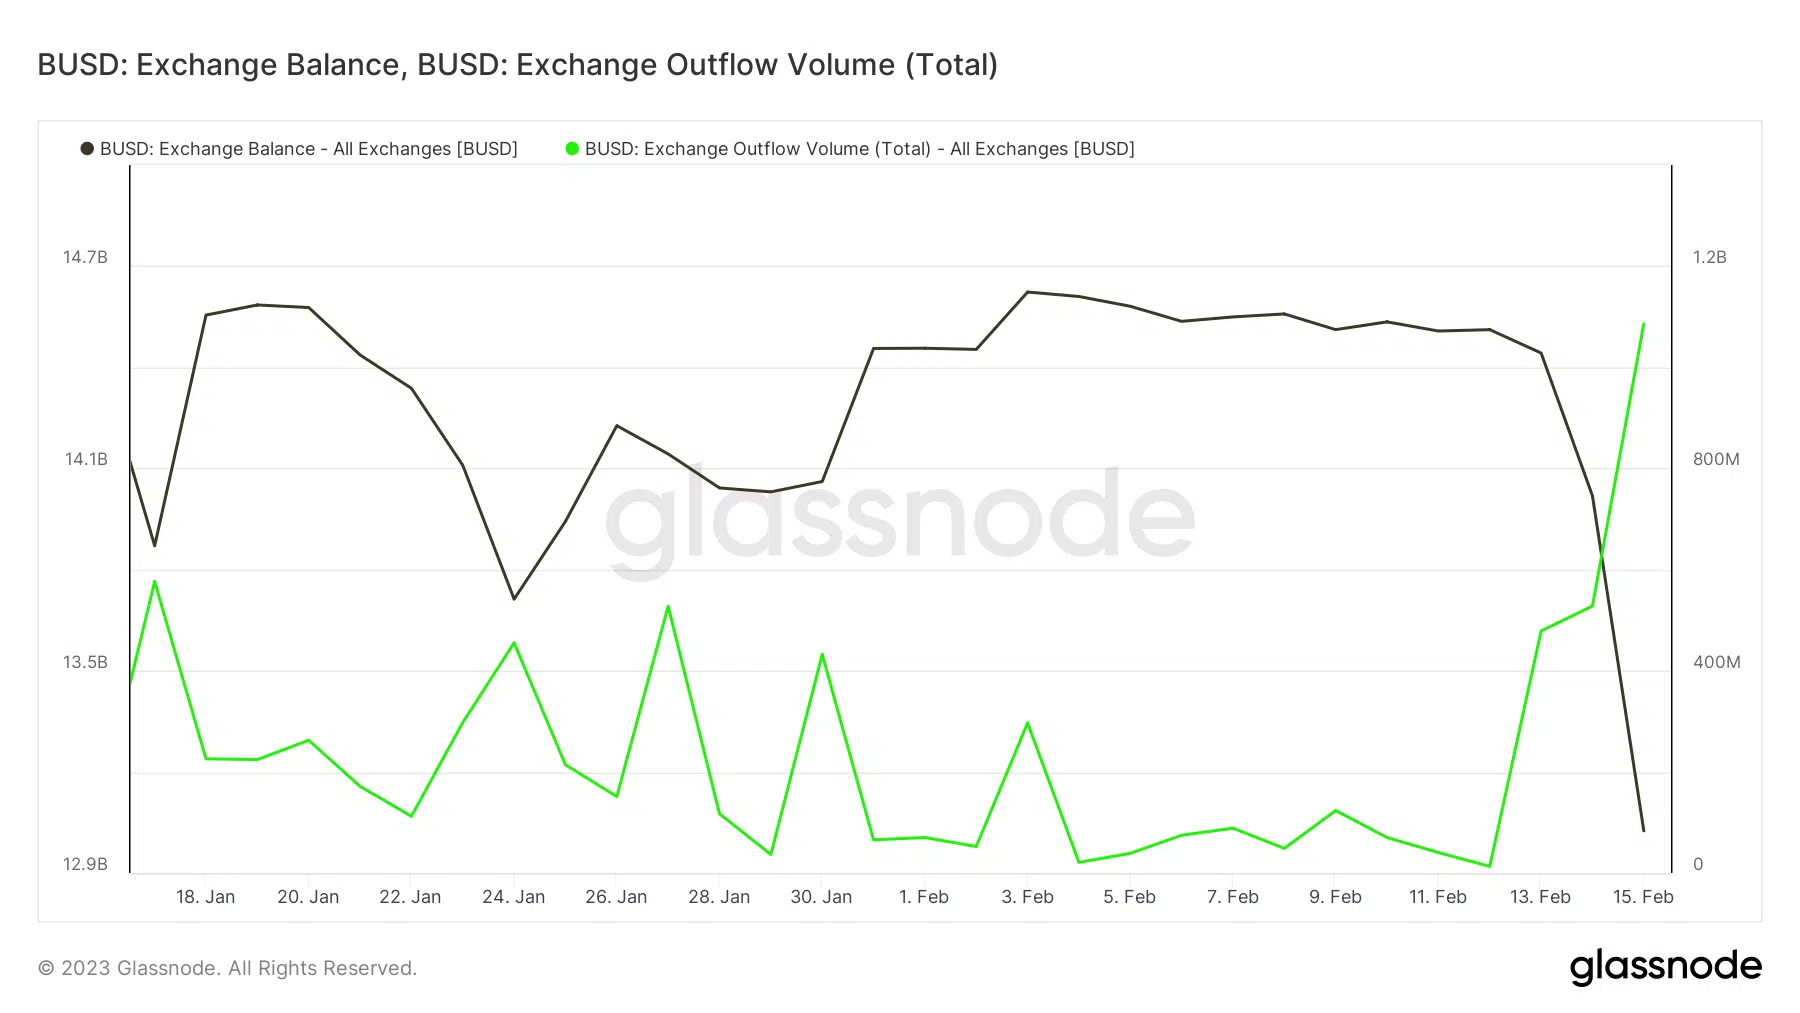 BUSD exchange balance and exchange outflow volume